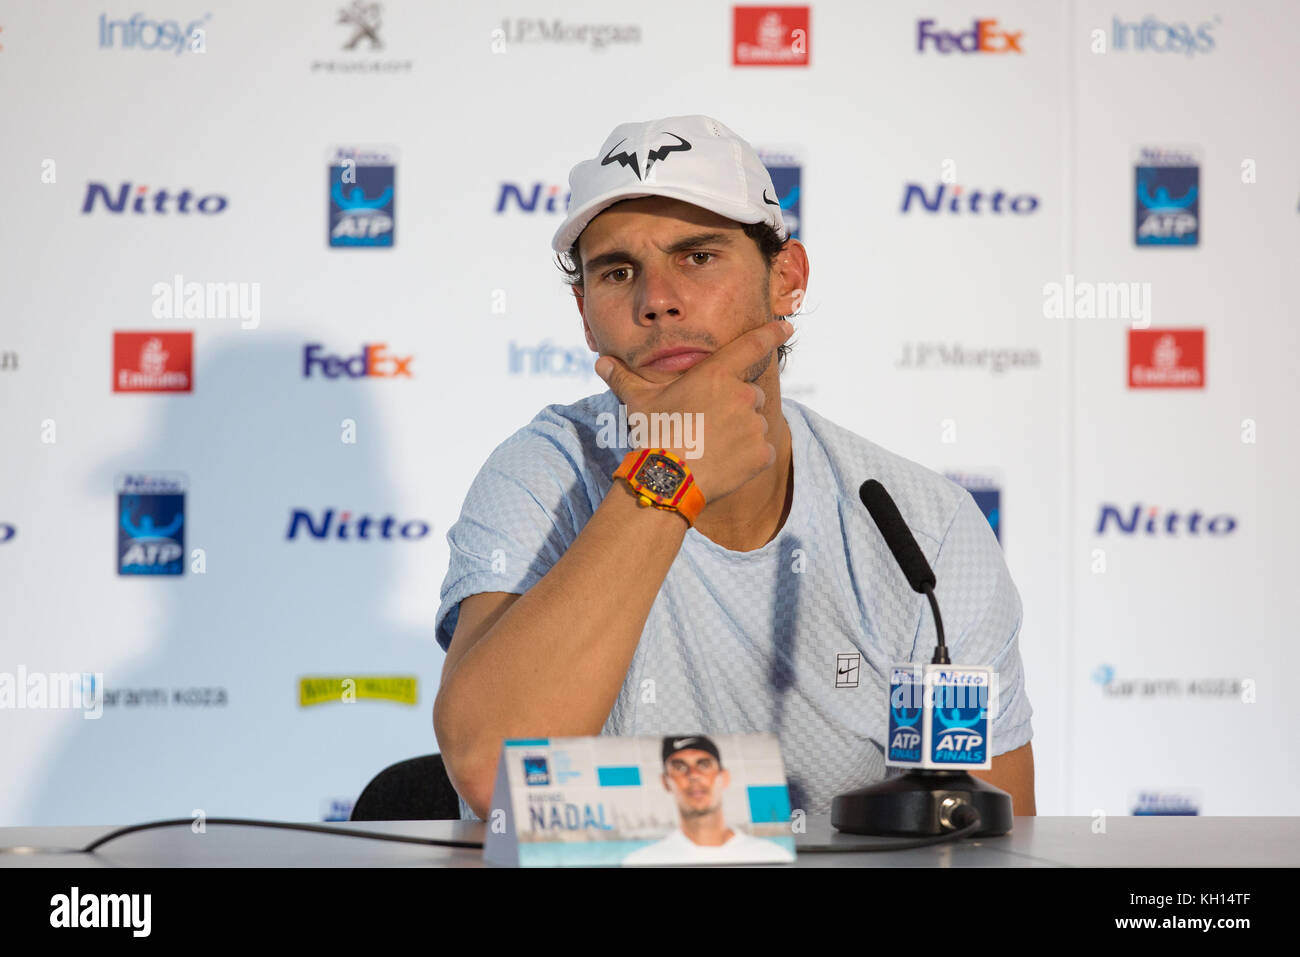 London, UK. 13th Nov, 2017. Rafael 'Rafa' NADAL (Spain) announces his retirement from this years ATP London through injury in a post match press interview during the NITTO ATP World Tour Finals match between RAFAEL NADAL and David Goffin at the O2, London, England on 13 November 2017. Photo by Andy Rowland. Credit: Andrew Rowland/Alamy Live News Stock Photo